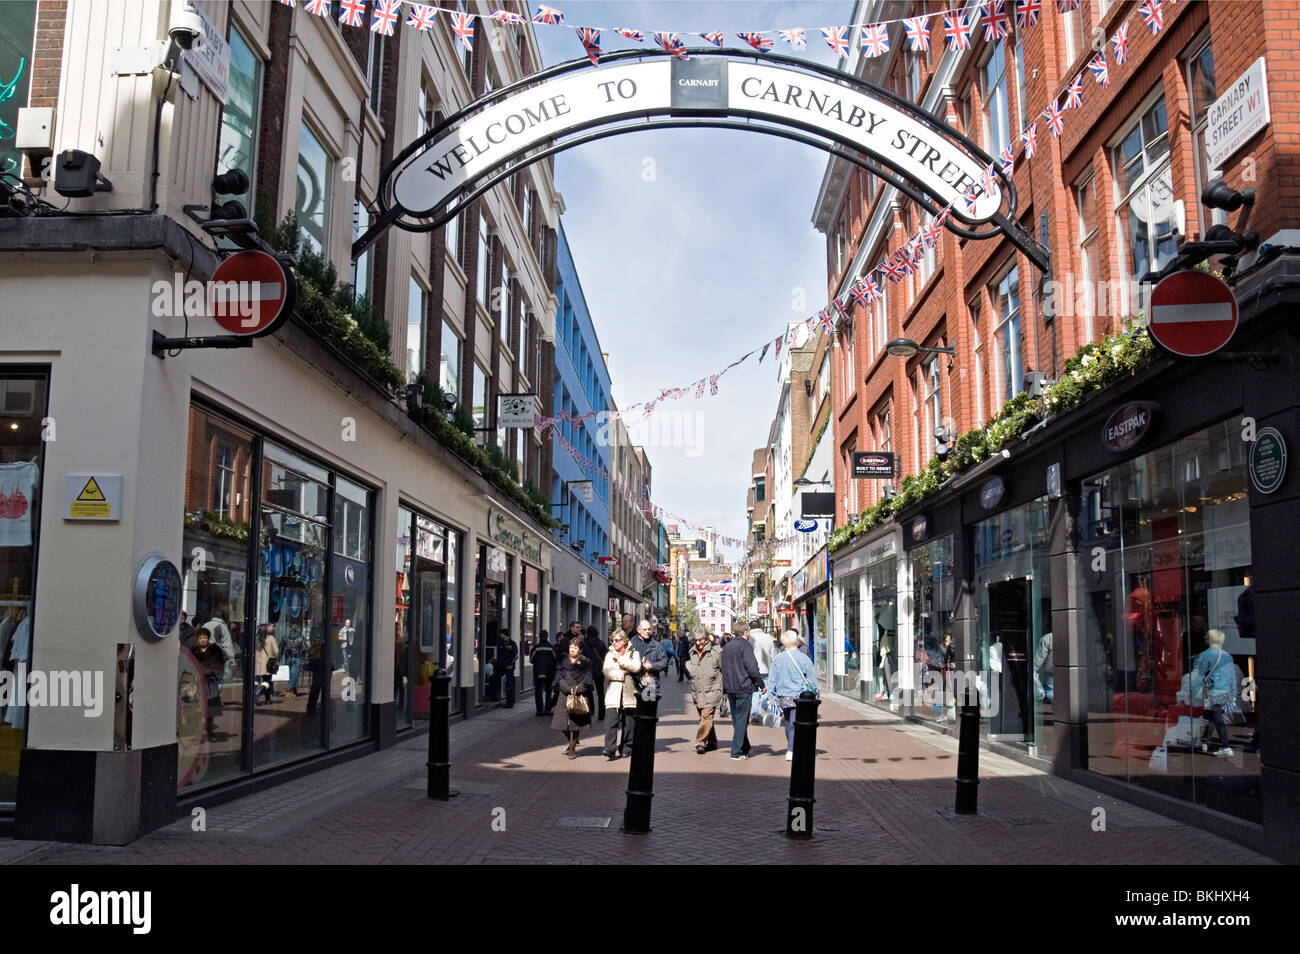 Carnaby Street with overhead sign, London Stock Photo